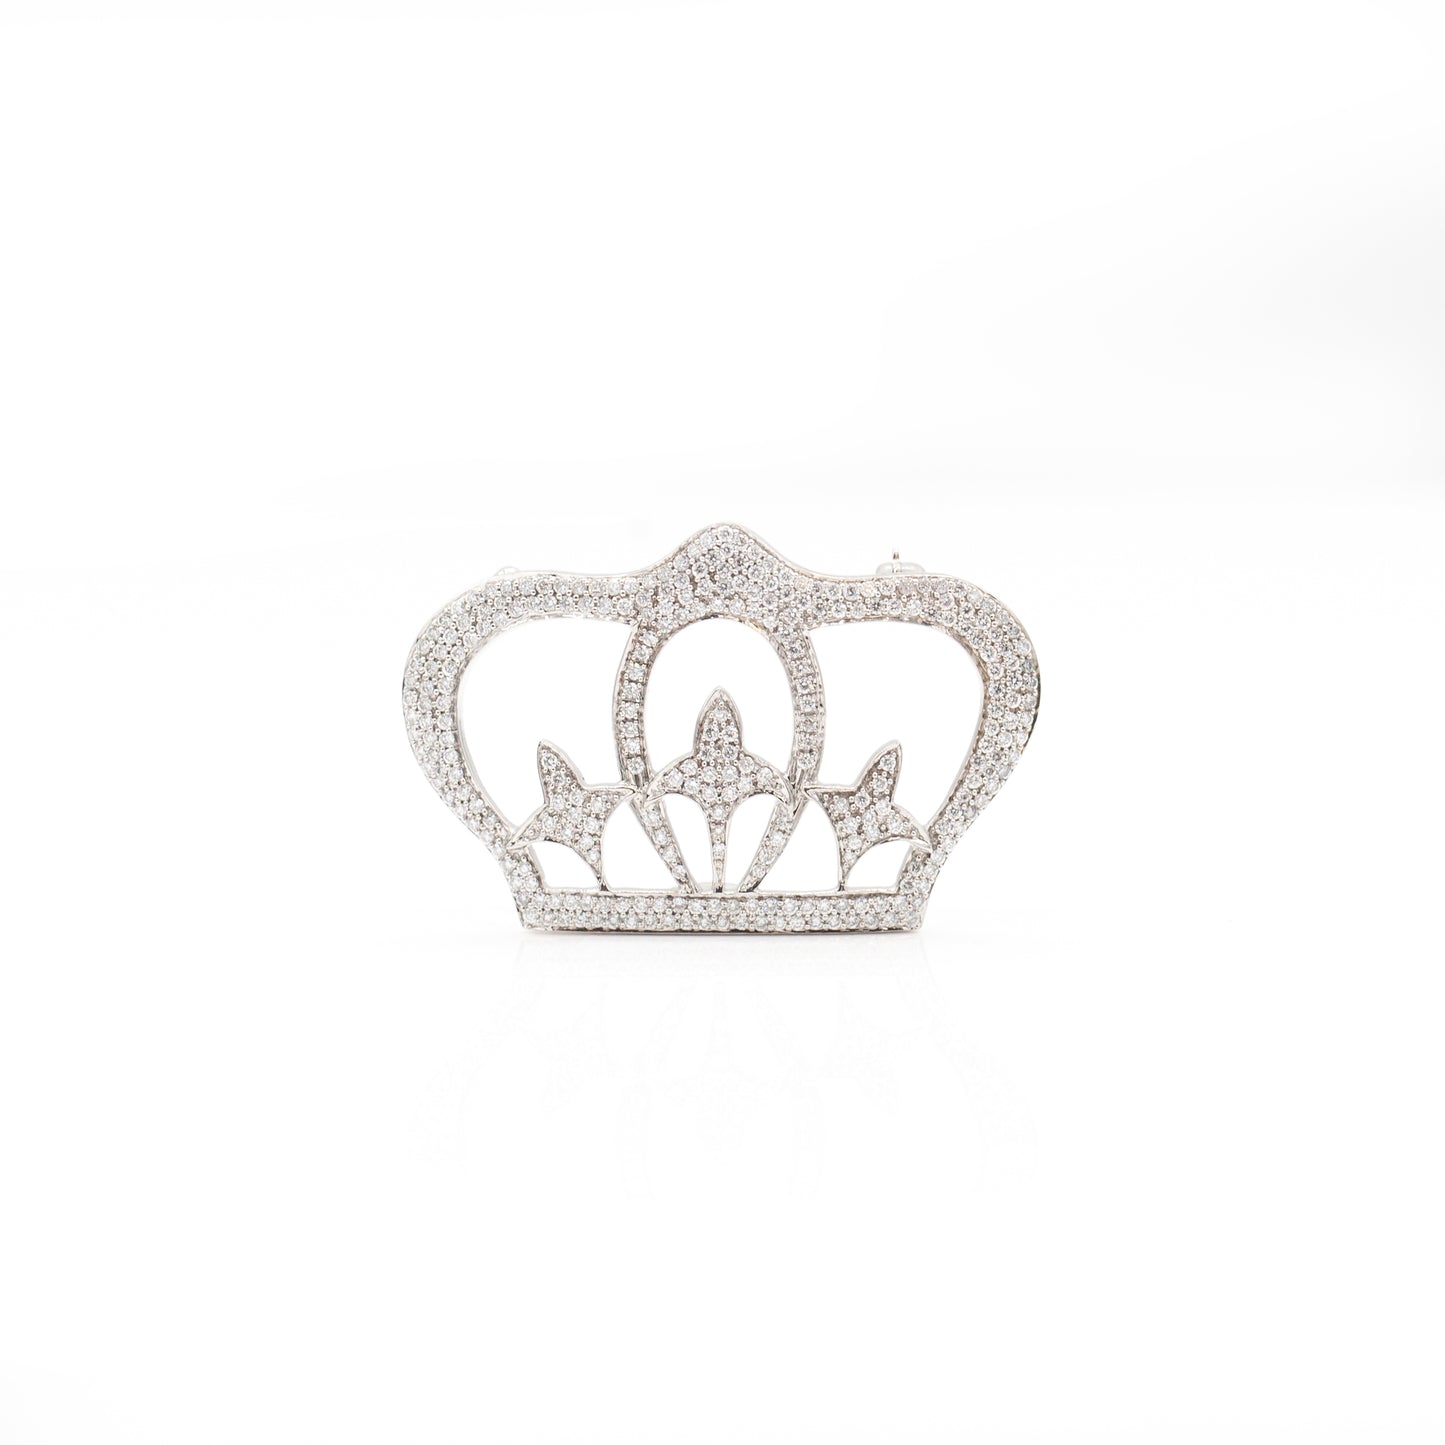 Estate Collection 1.5CT Diamond  Crown Brooch